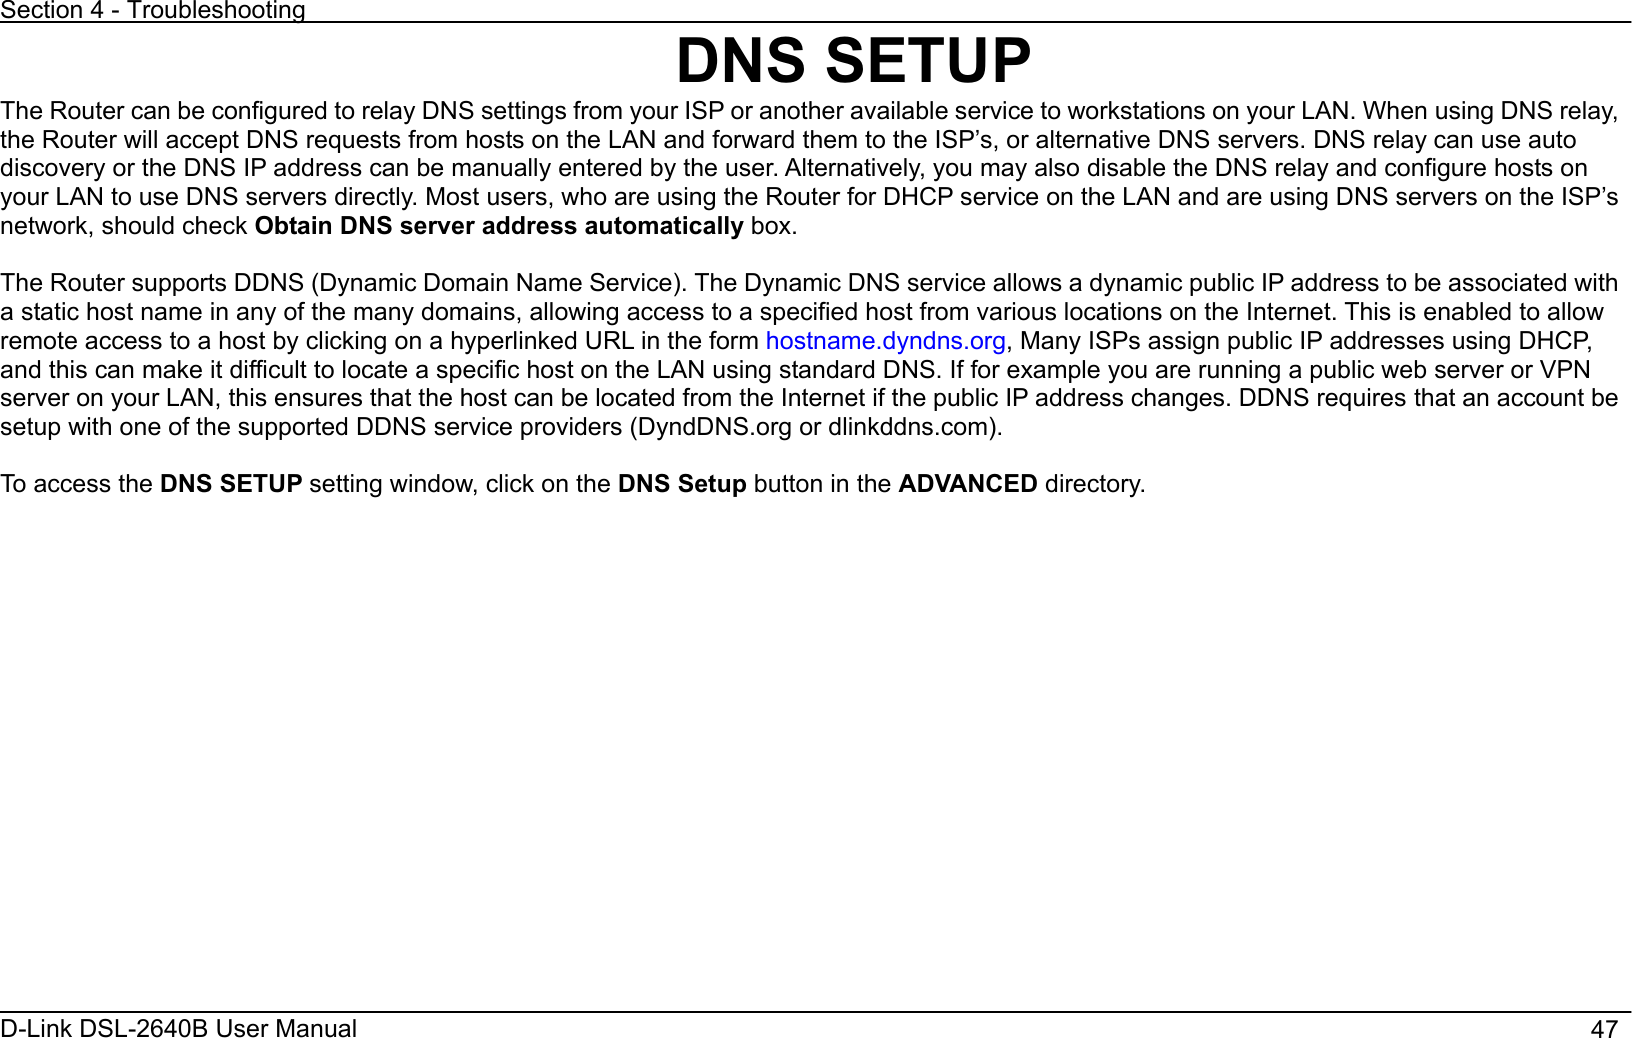 Section 4 - Troubleshooting D-Link DSL-2640B User Manual                                       47DNS SETUP The Router can be configured to relay DNS settings from your ISP or another available service to workstations on your LAN. When using DNS relay, the Router will accept DNS requests from hosts on the LAN and forward them to the ISP’s, or alternative DNS servers. DNS relay can use auto discovery or the DNS IP address can be manually entered by the user. Alternatively, you may also disable the DNS relay and configure hosts on your LAN to use DNS servers directly. Most users, who are using the Router for DHCP service on the LAN and are using DNS servers on the ISP’s network, should check Obtain DNS server address automatically box.The Router supports DDNS (Dynamic Domain Name Service). The Dynamic DNS service allows a dynamic public IP address to be associated with a static host name in any of the many domains, allowing access to a specified host from various locations on the Internet. This is enabled to allow remote access to a host by clicking on a hyperlinked URL in the form hostname.dyndns.org, Many ISPs assign public IP addresses using DHCP, and this can make it difficult to locate a specific host on the LAN using standard DNS. If for example you are running a public web server or VPN server on your LAN, this ensures that the host can be located from the Internet if the public IP address changes. DDNS requires that an account be setup with one of the supported DDNS service providers (DyndDNS.org or dlinkddns.com). To access the DNS SETUP setting window, click on the DNS Setup button in the ADVANCED directory. 